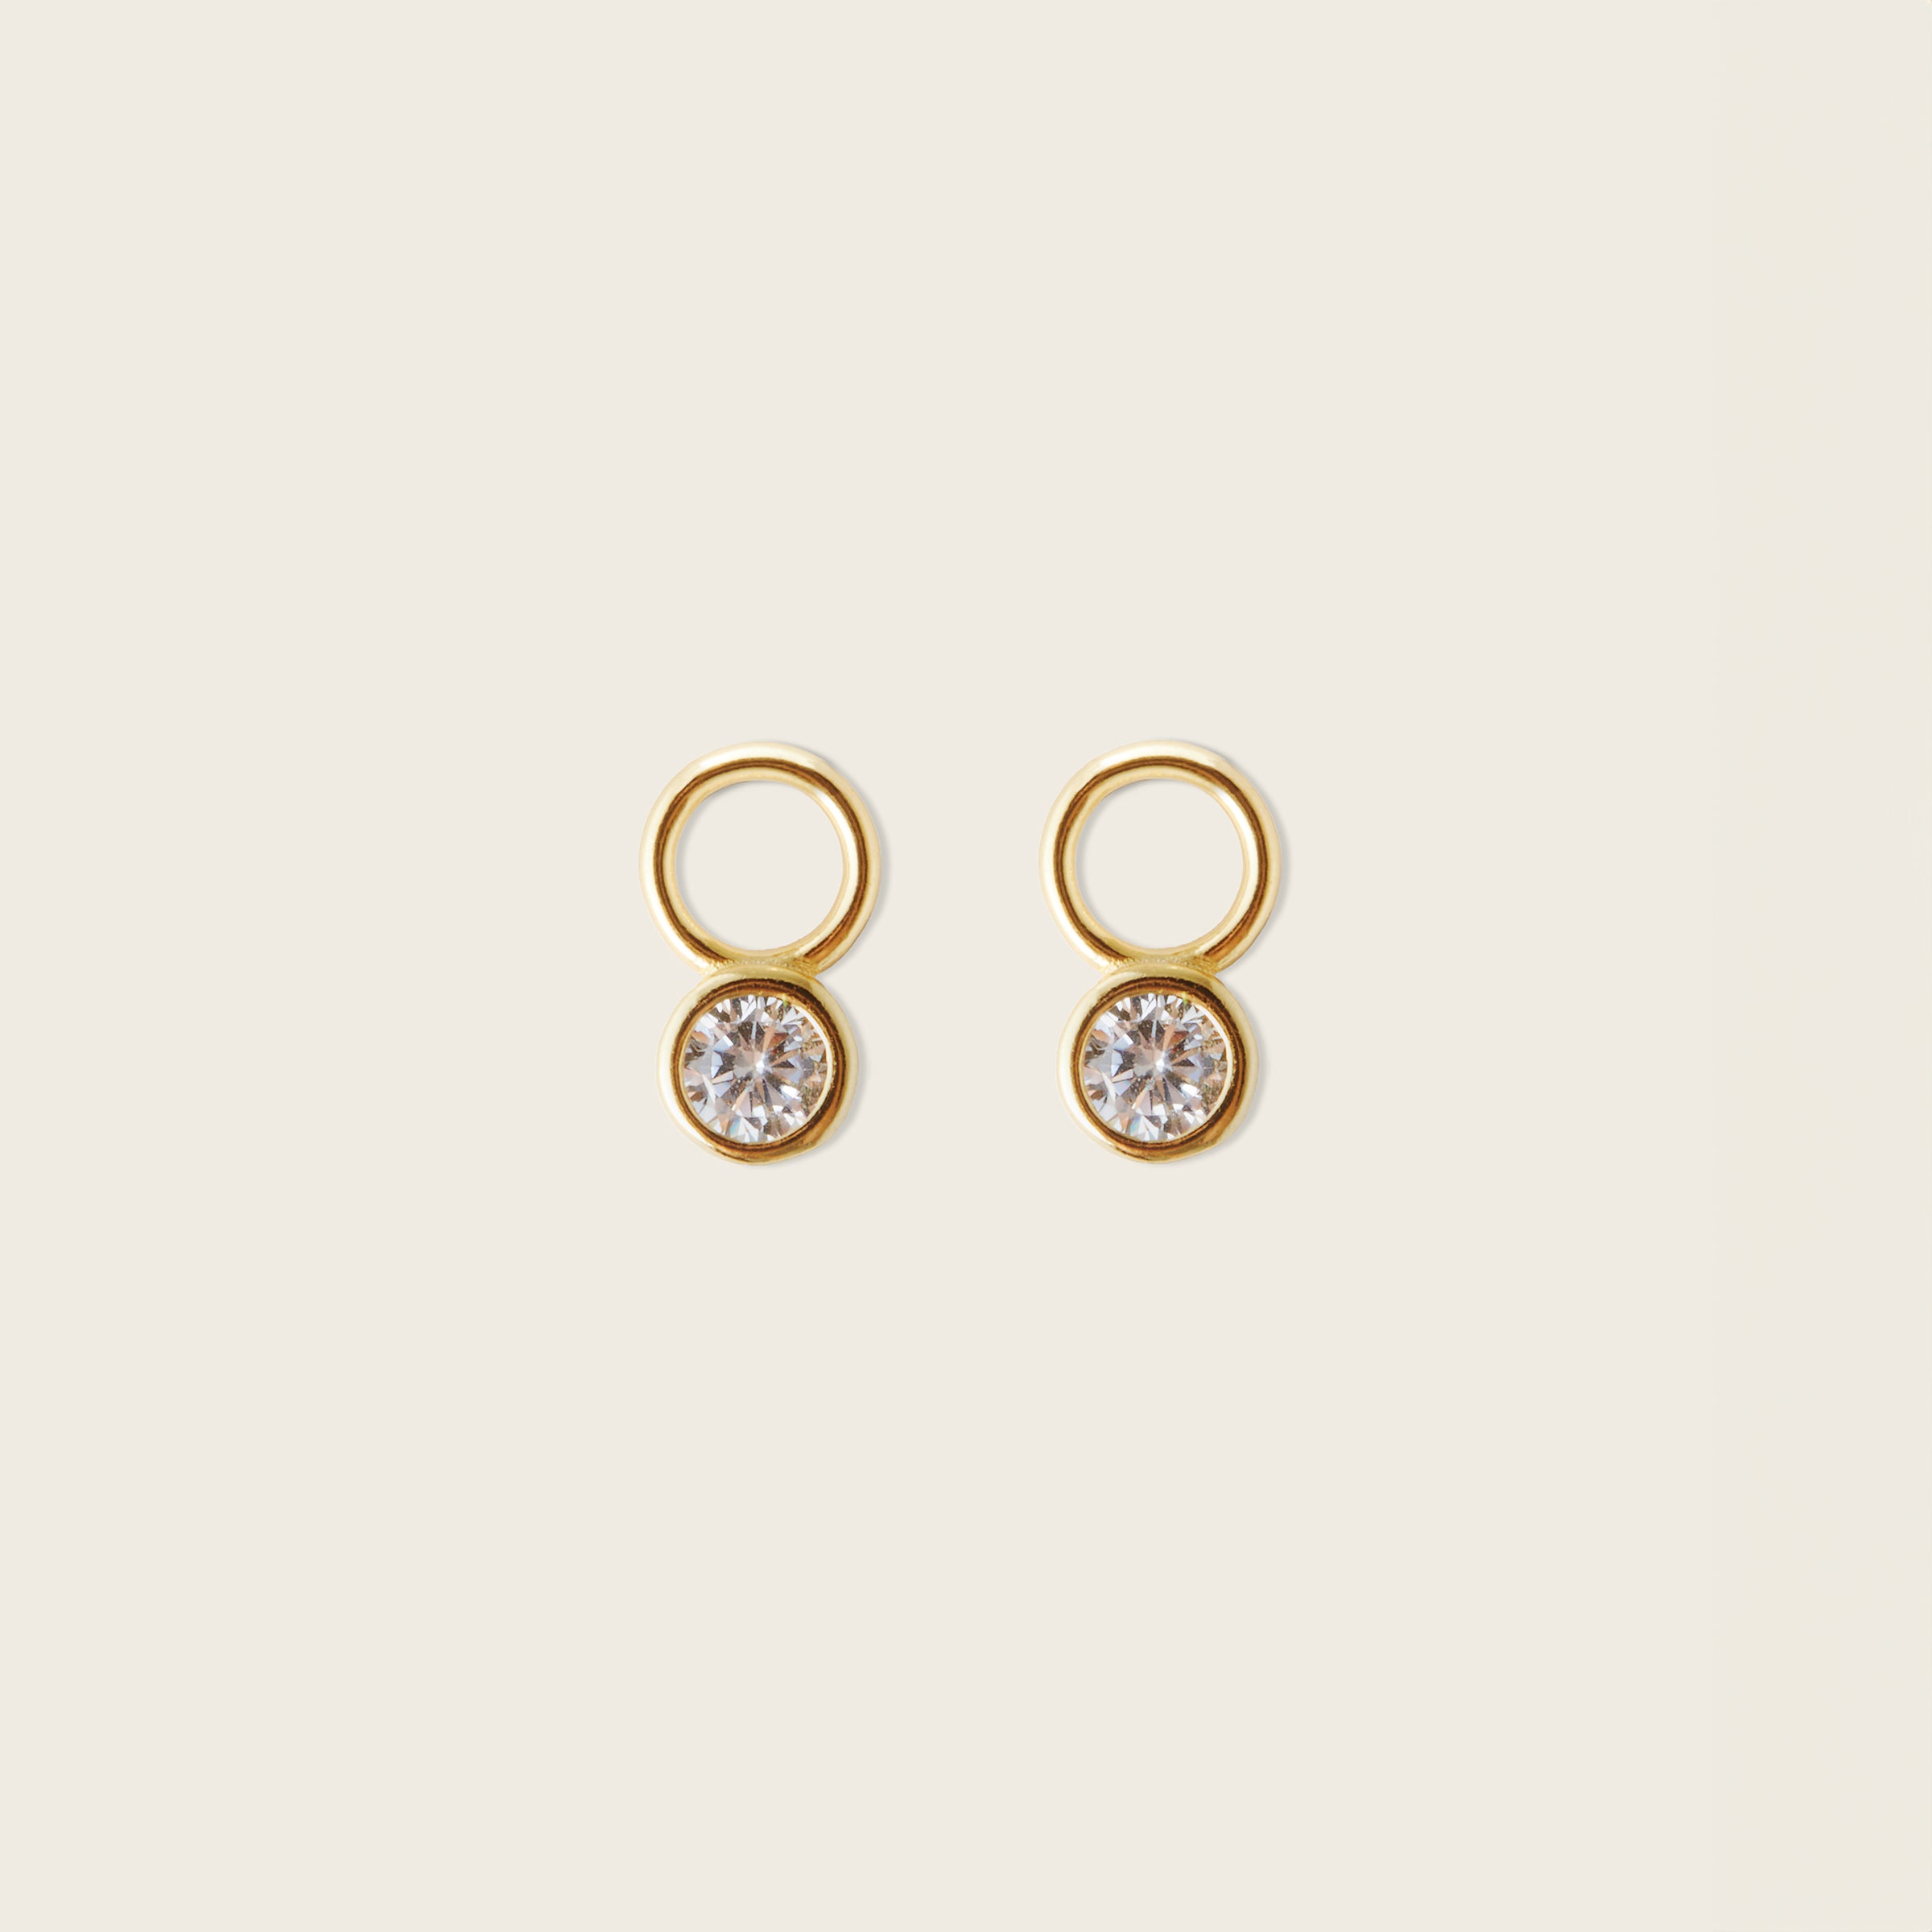 Image of the Mini Gemstone Hoop Charms are made with high-quality materials, including 18K gold plating over 925 Sterling Silver. These charms are both non-tarnish and water resistant. The perfect combination of style and durability.